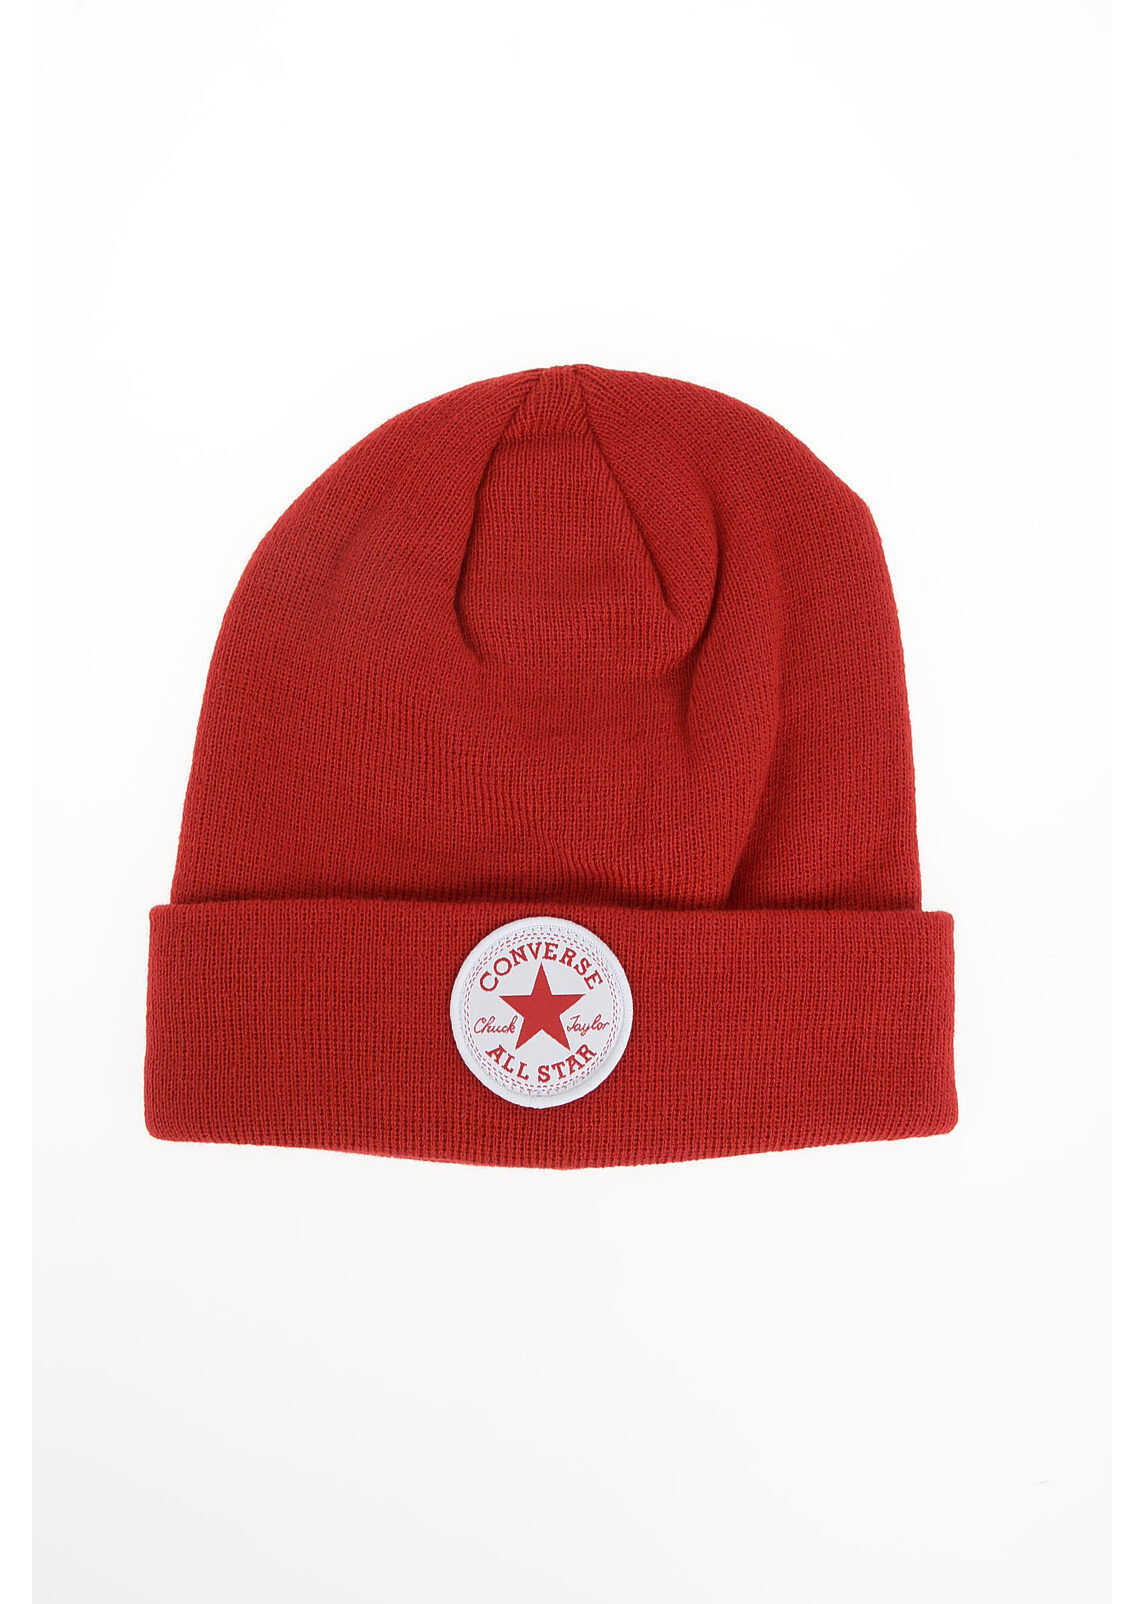 Converse Kids All Star Ribbed Beanie With Logo Red image9